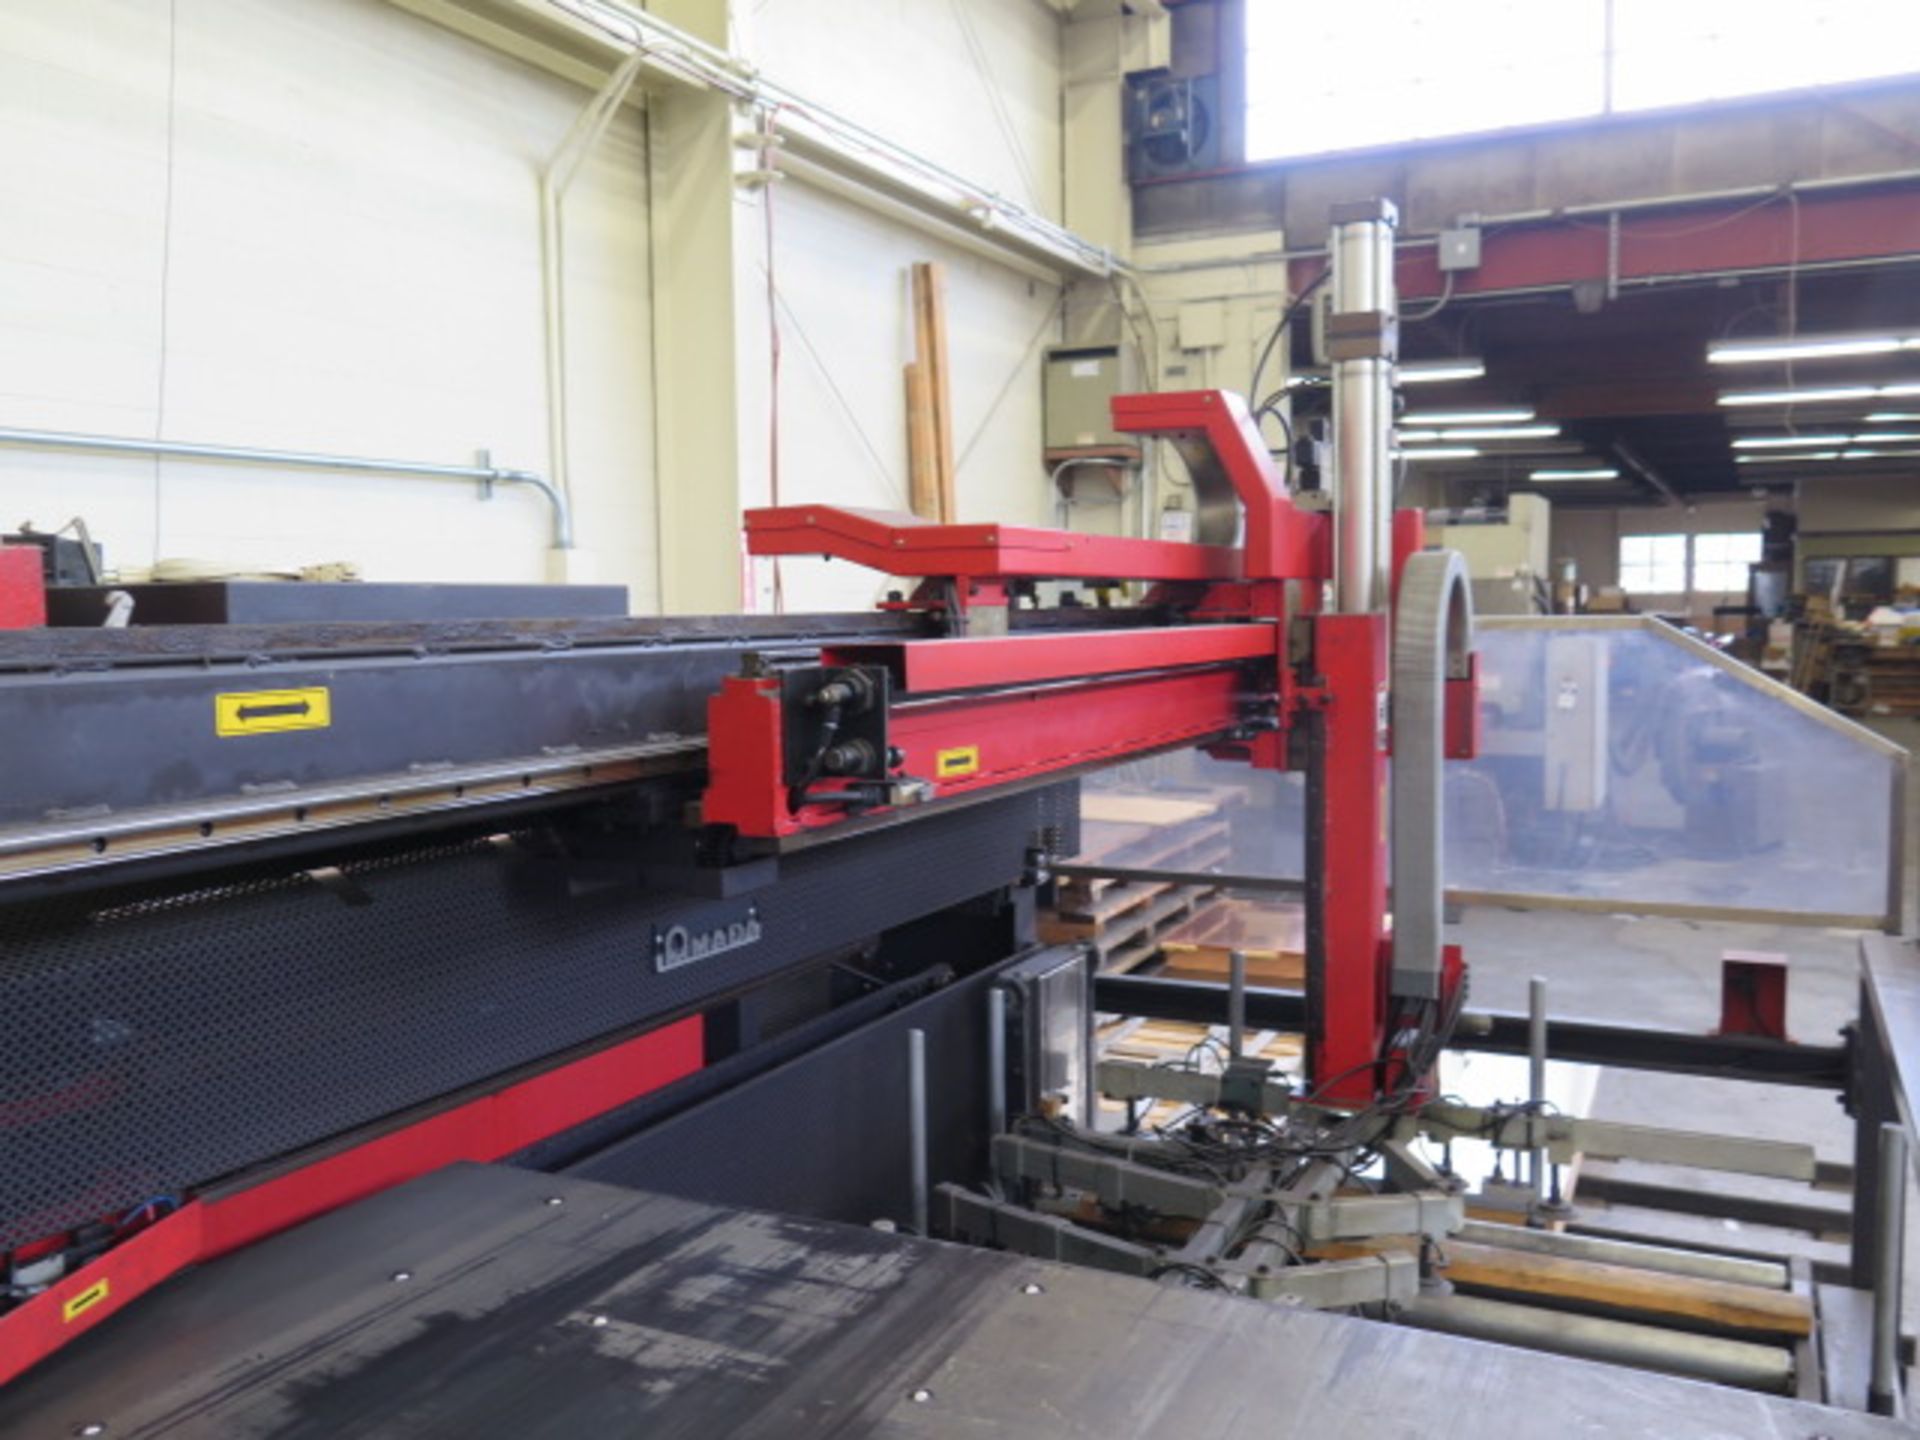 Amada VIPROS 345 30-Ton CNC Turret Punch Cell s/n 34510153 w/ 04P-C Controls, 58-Station, SOLD AS IS - Image 24 of 28